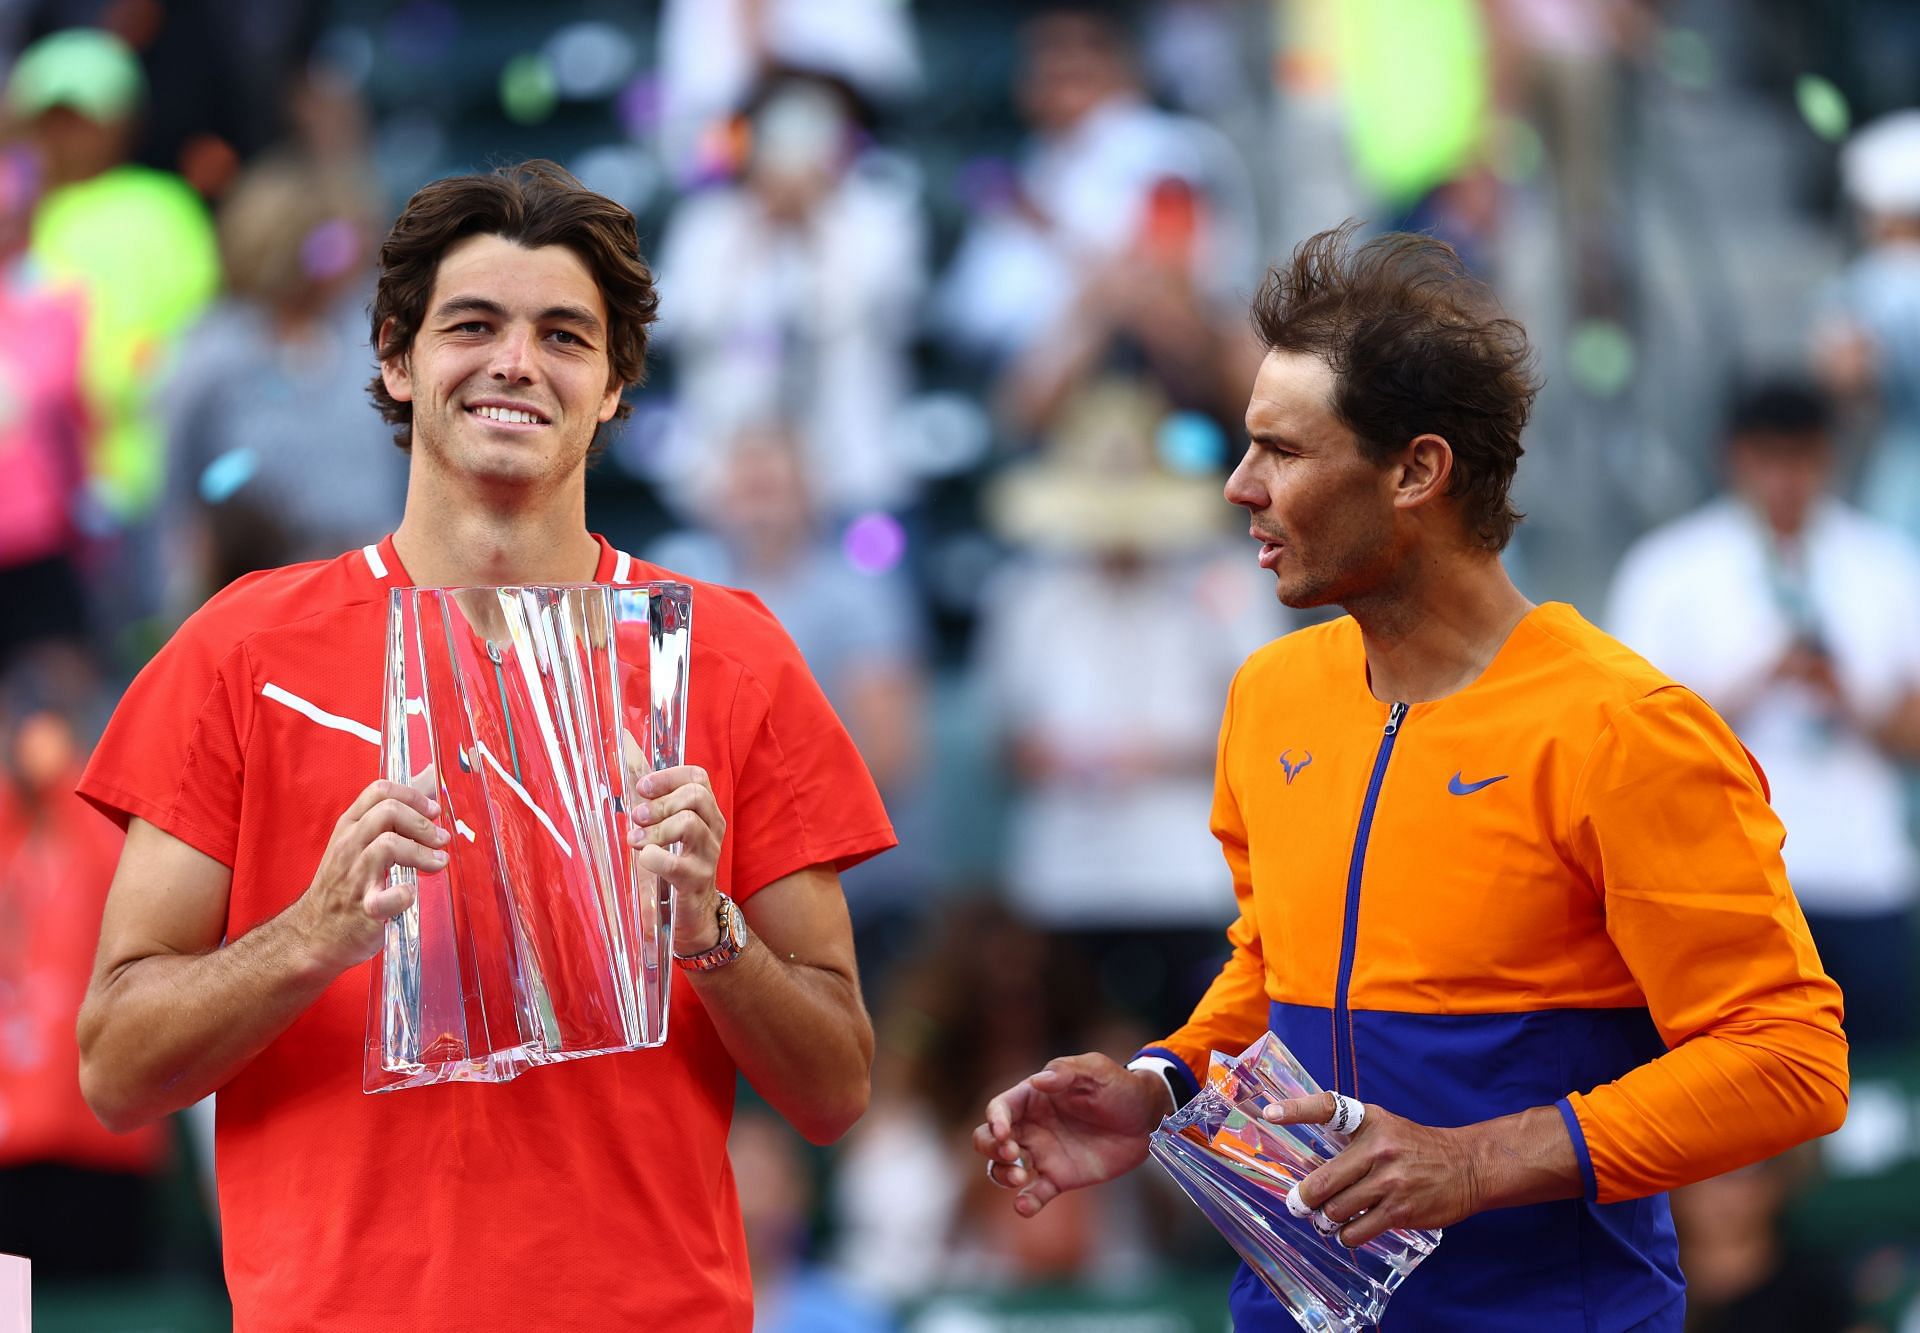 Nadal lost to Fritz in the finals of the Indian Wells Open